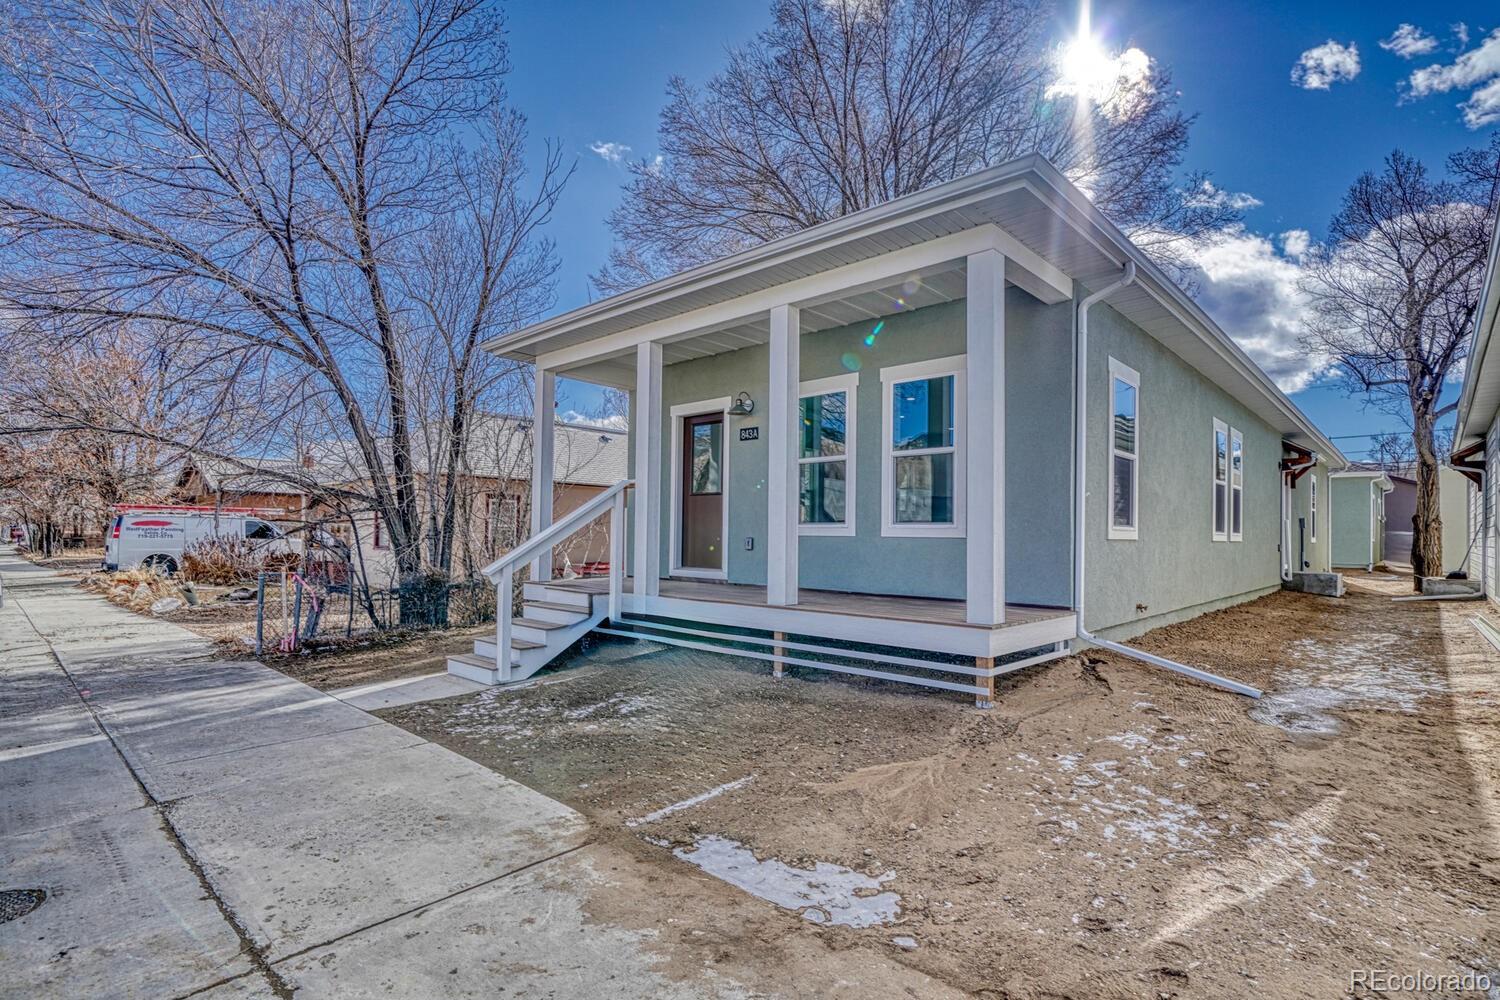 Report Image for 843 W First Street,Salida, Colorado